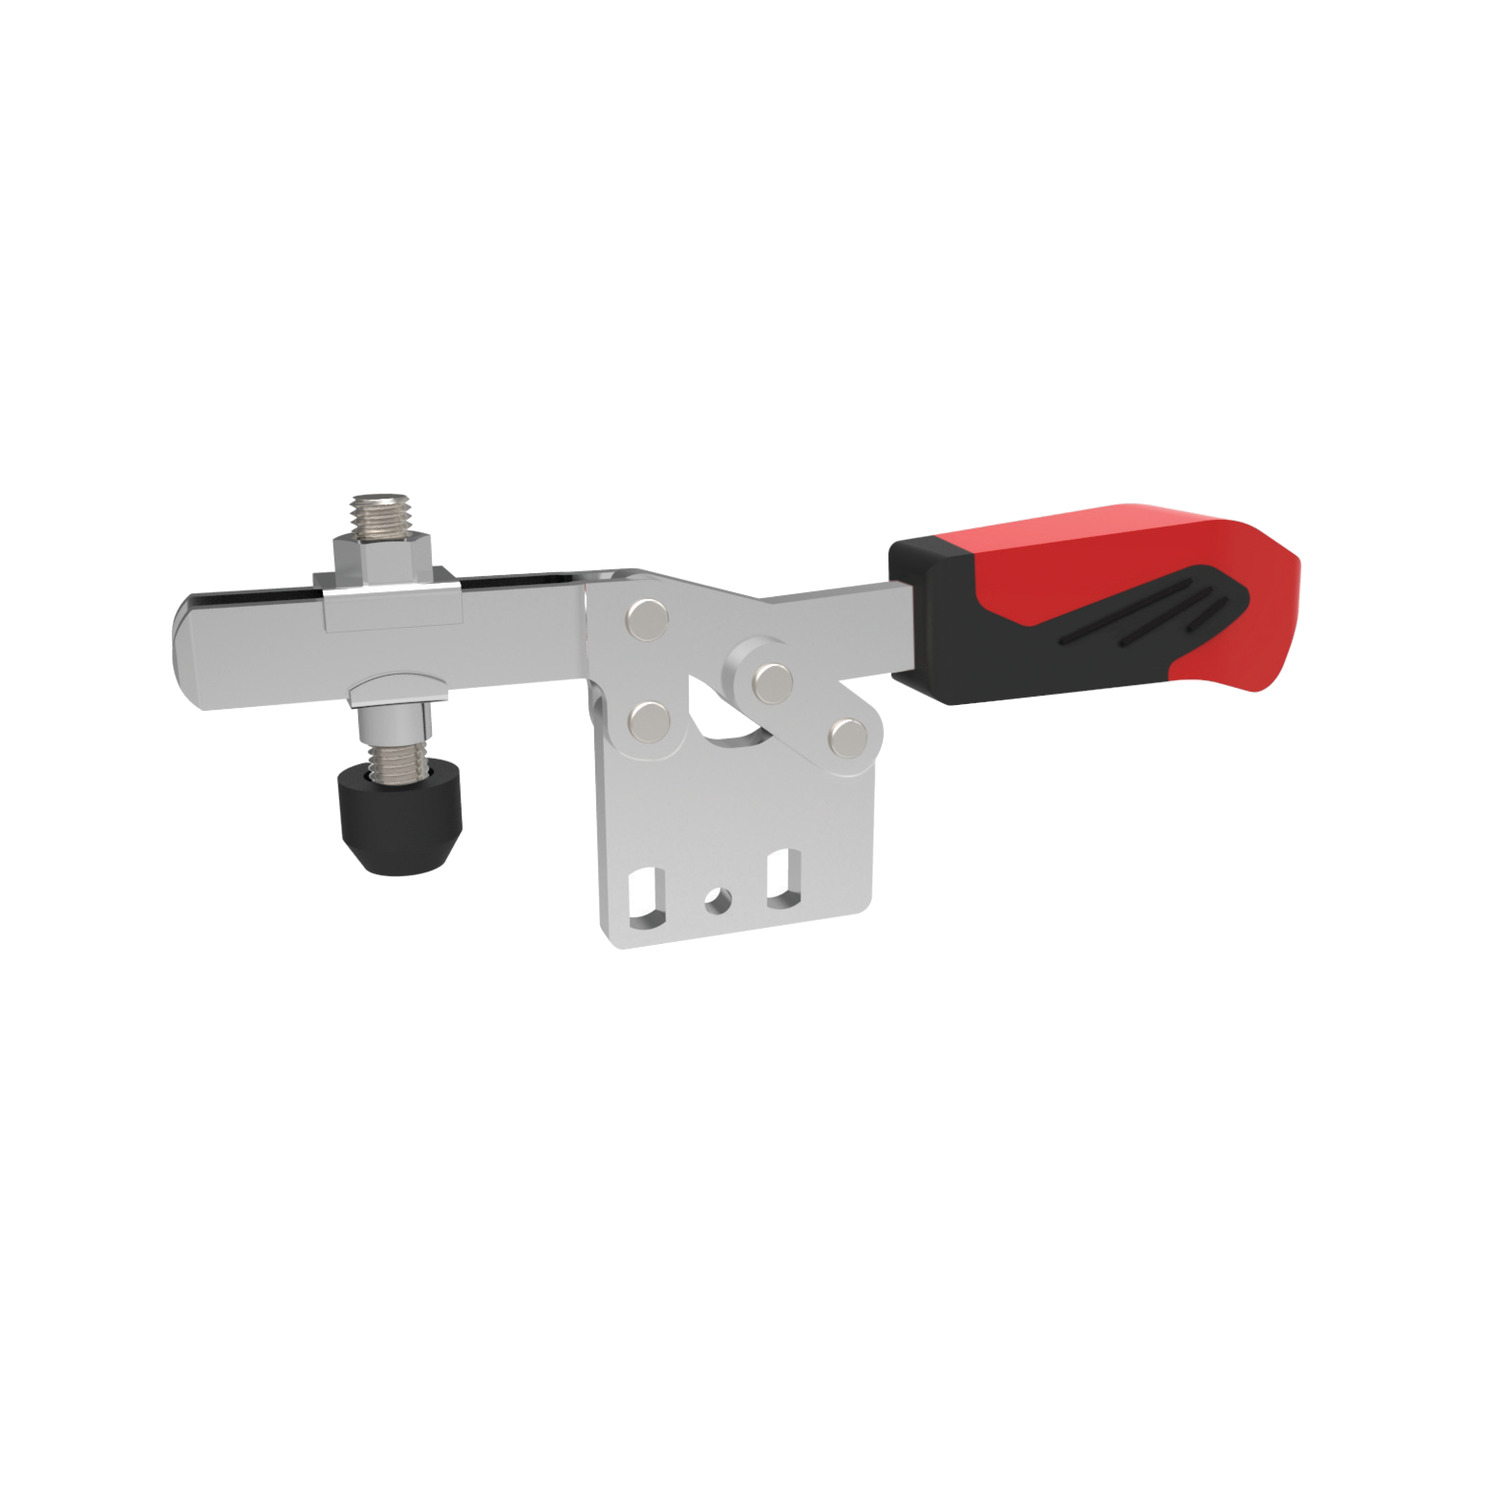 41050.1 Horizontal Acting Toggle Clamps